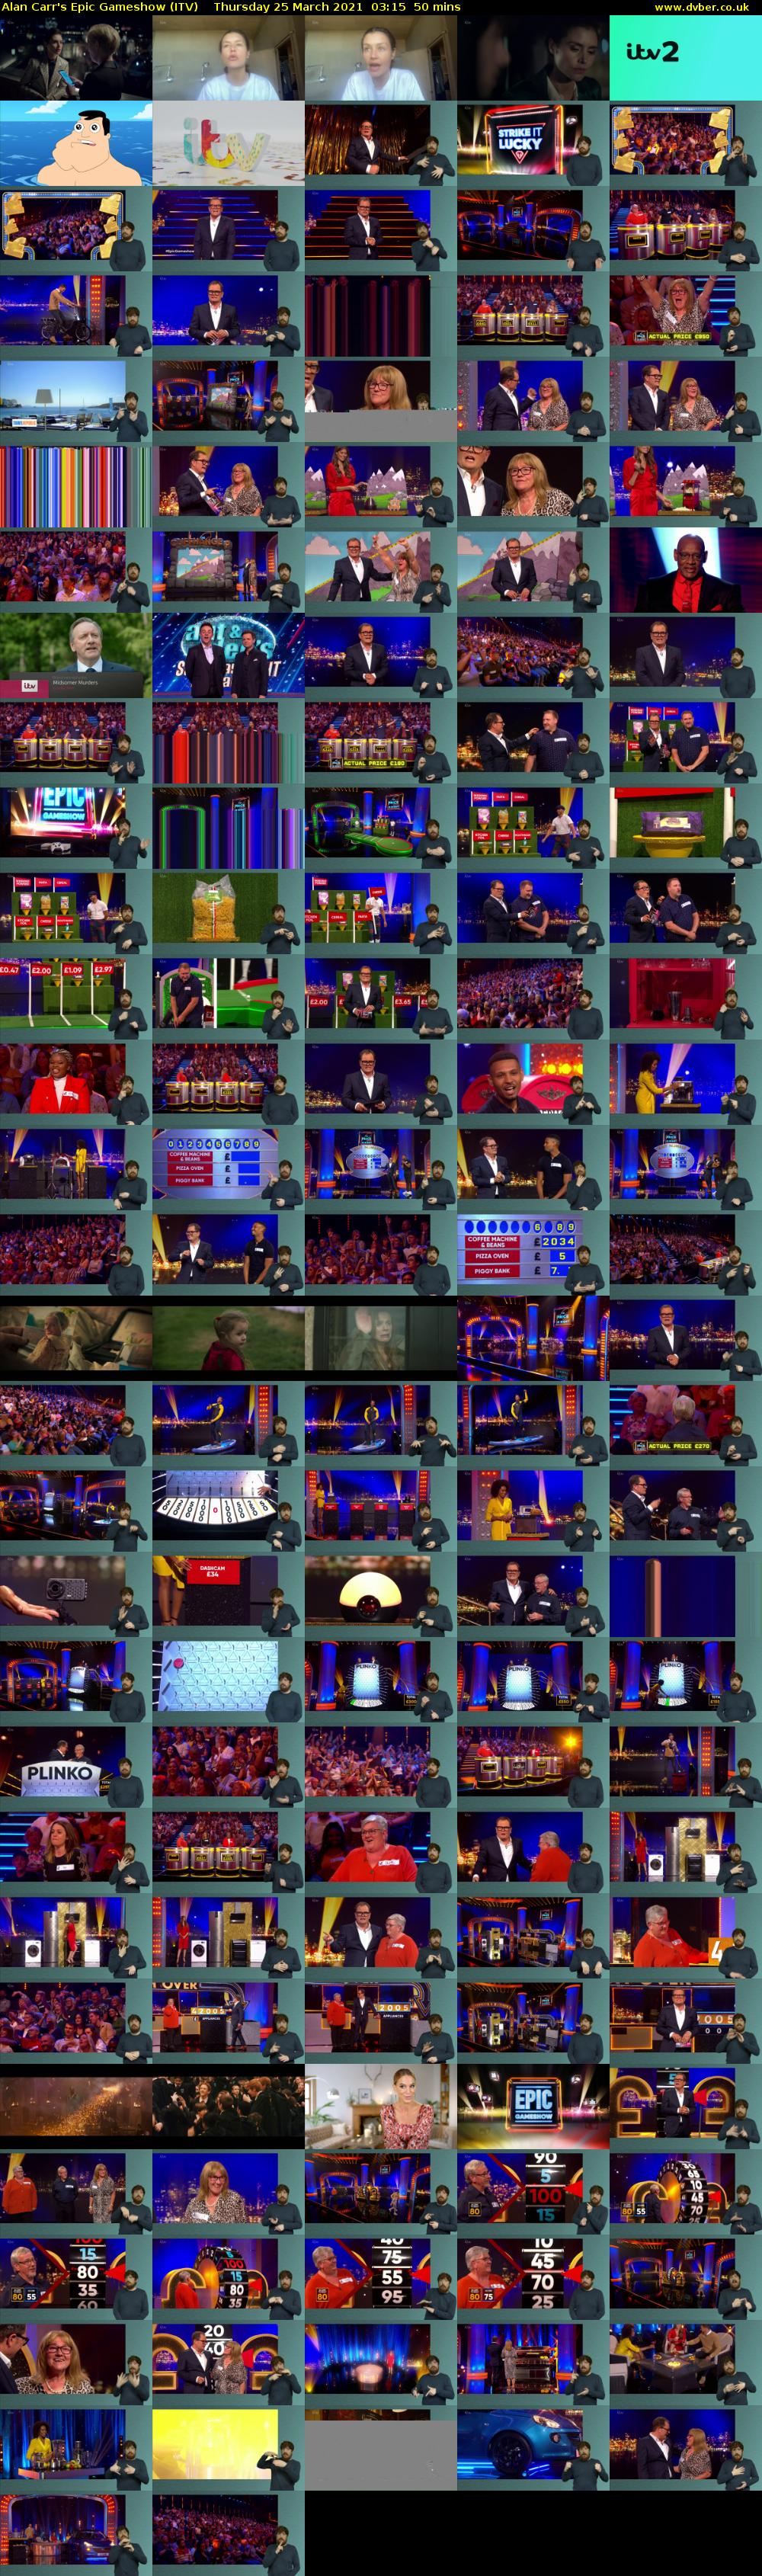 Alan Carr's Epic Gameshow (ITV) Thursday 25 March 2021 03:15 - 04:05